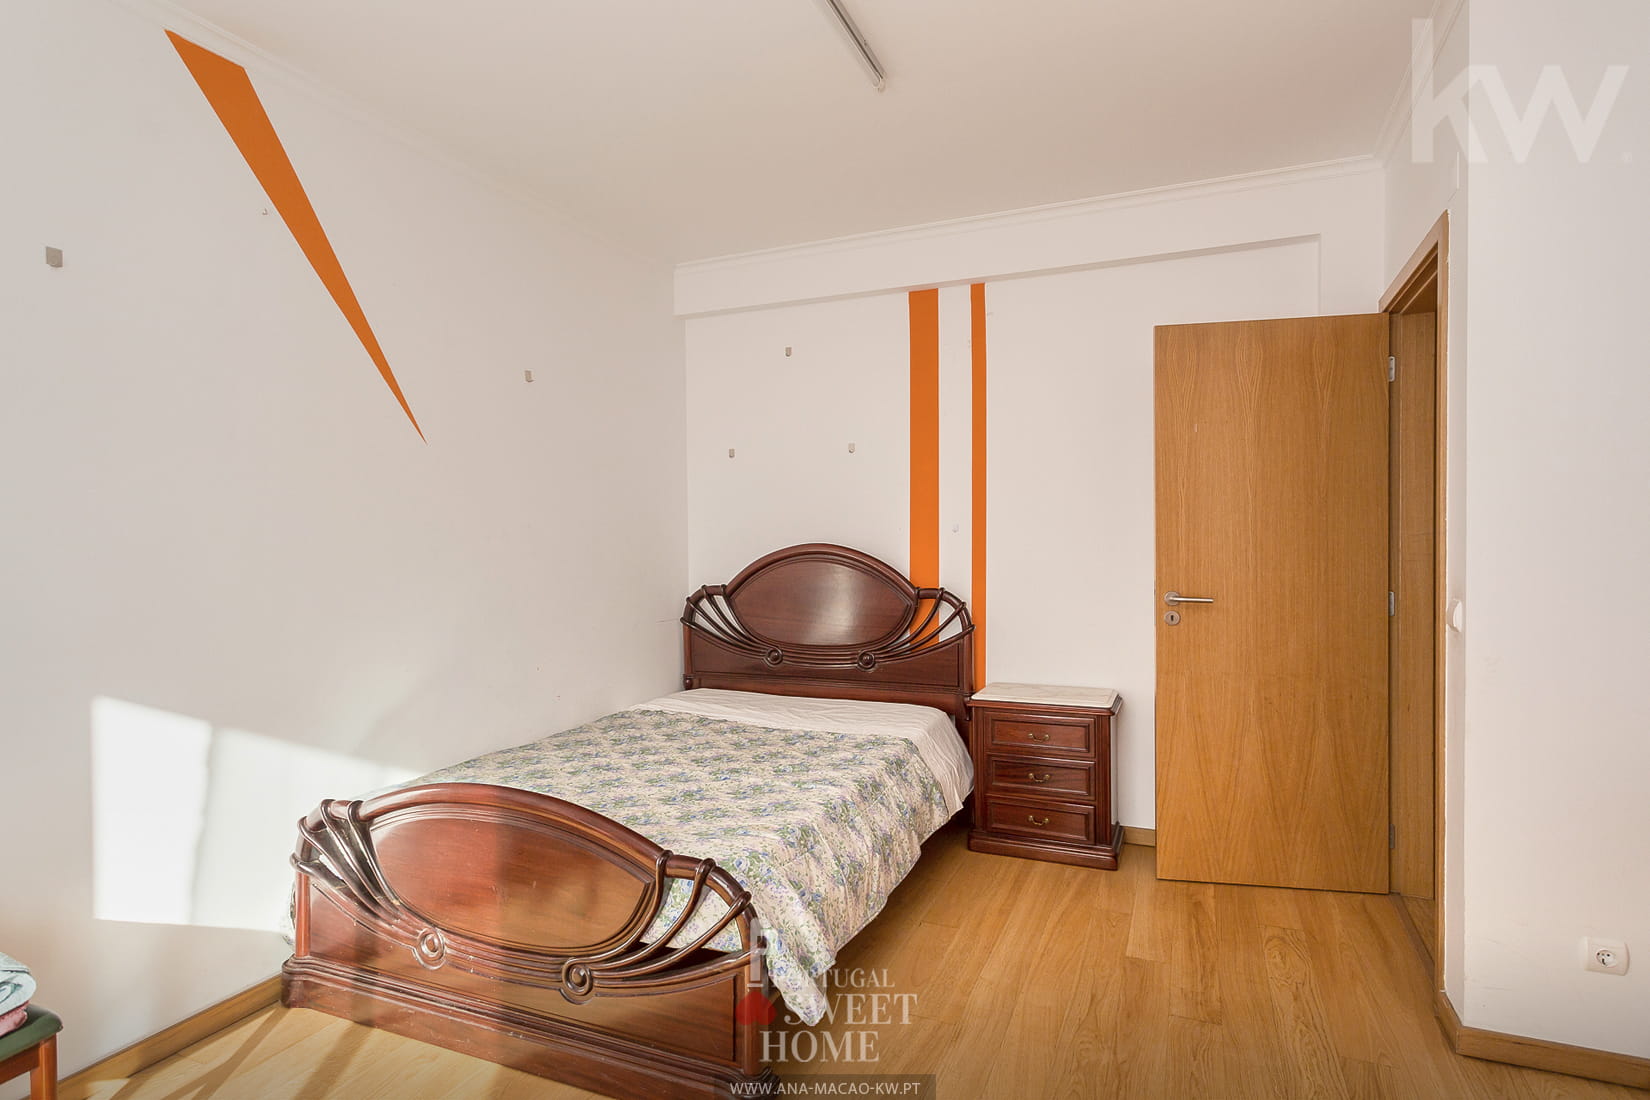 Bedroom / Office (14 m²) on the 0th floor, with access to the terrace